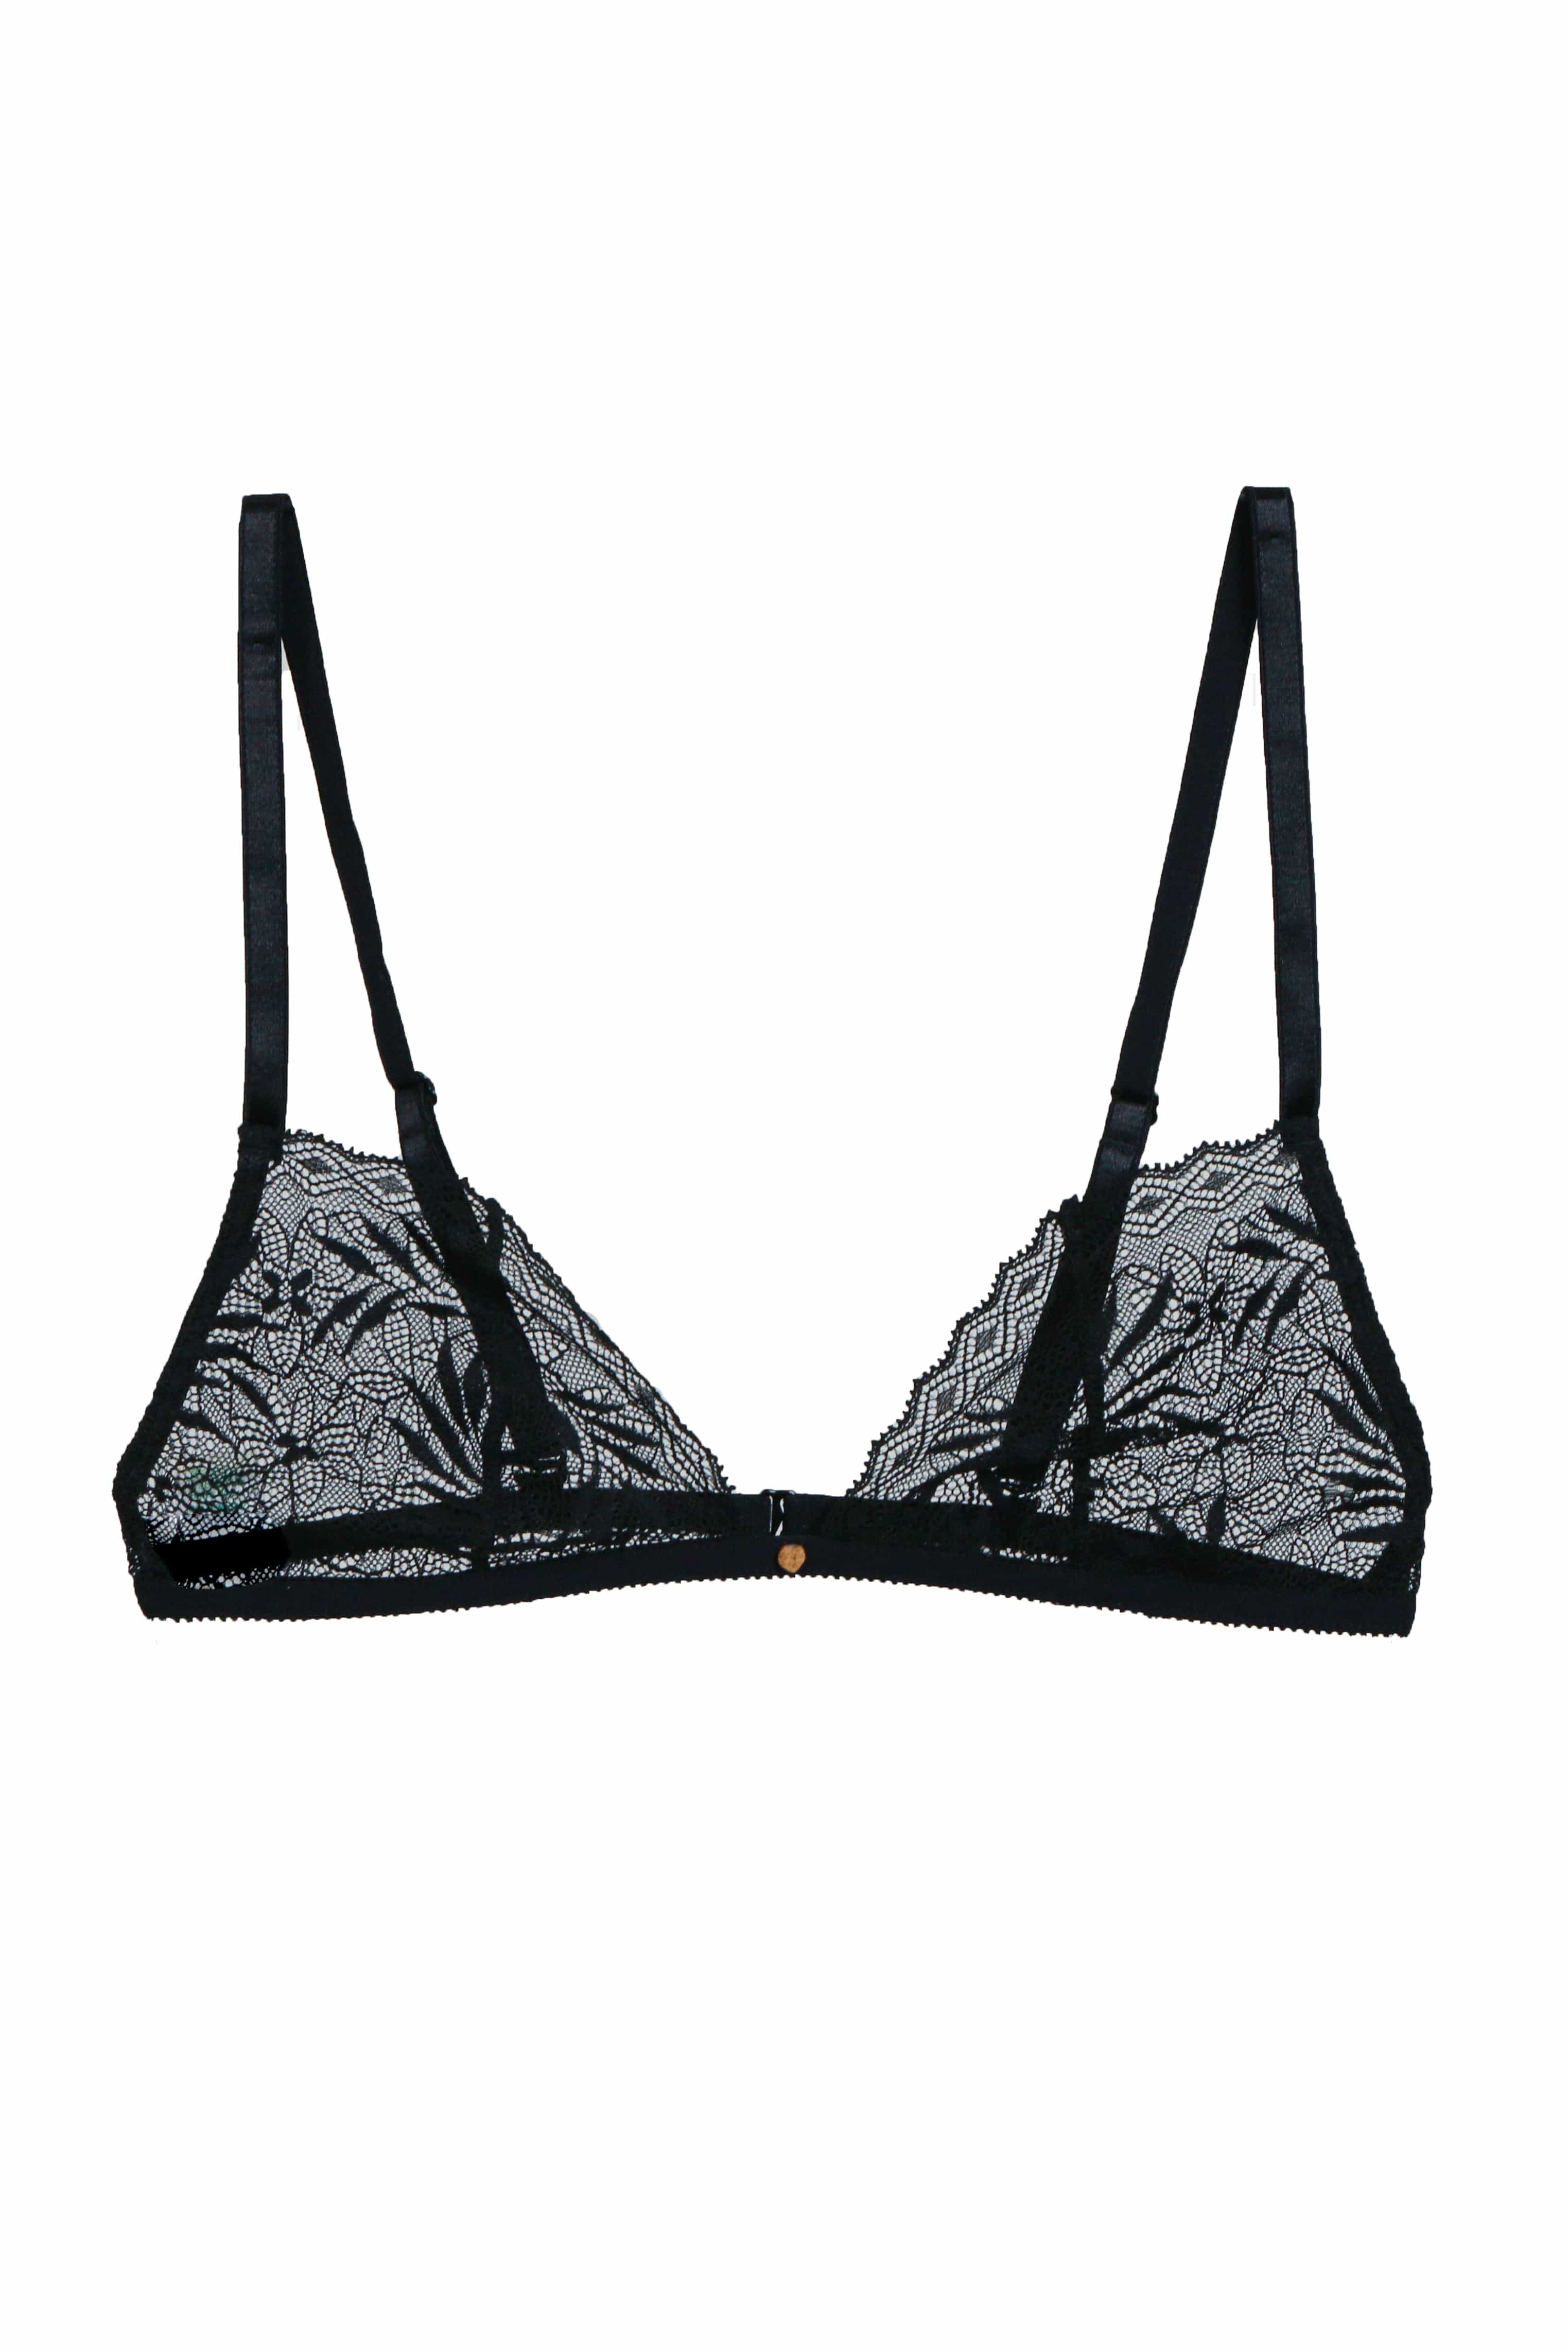 Spanish Sexy Lace Underwear Women Triangle Cup Thin Bra Set Lingerie Suit  with Panties